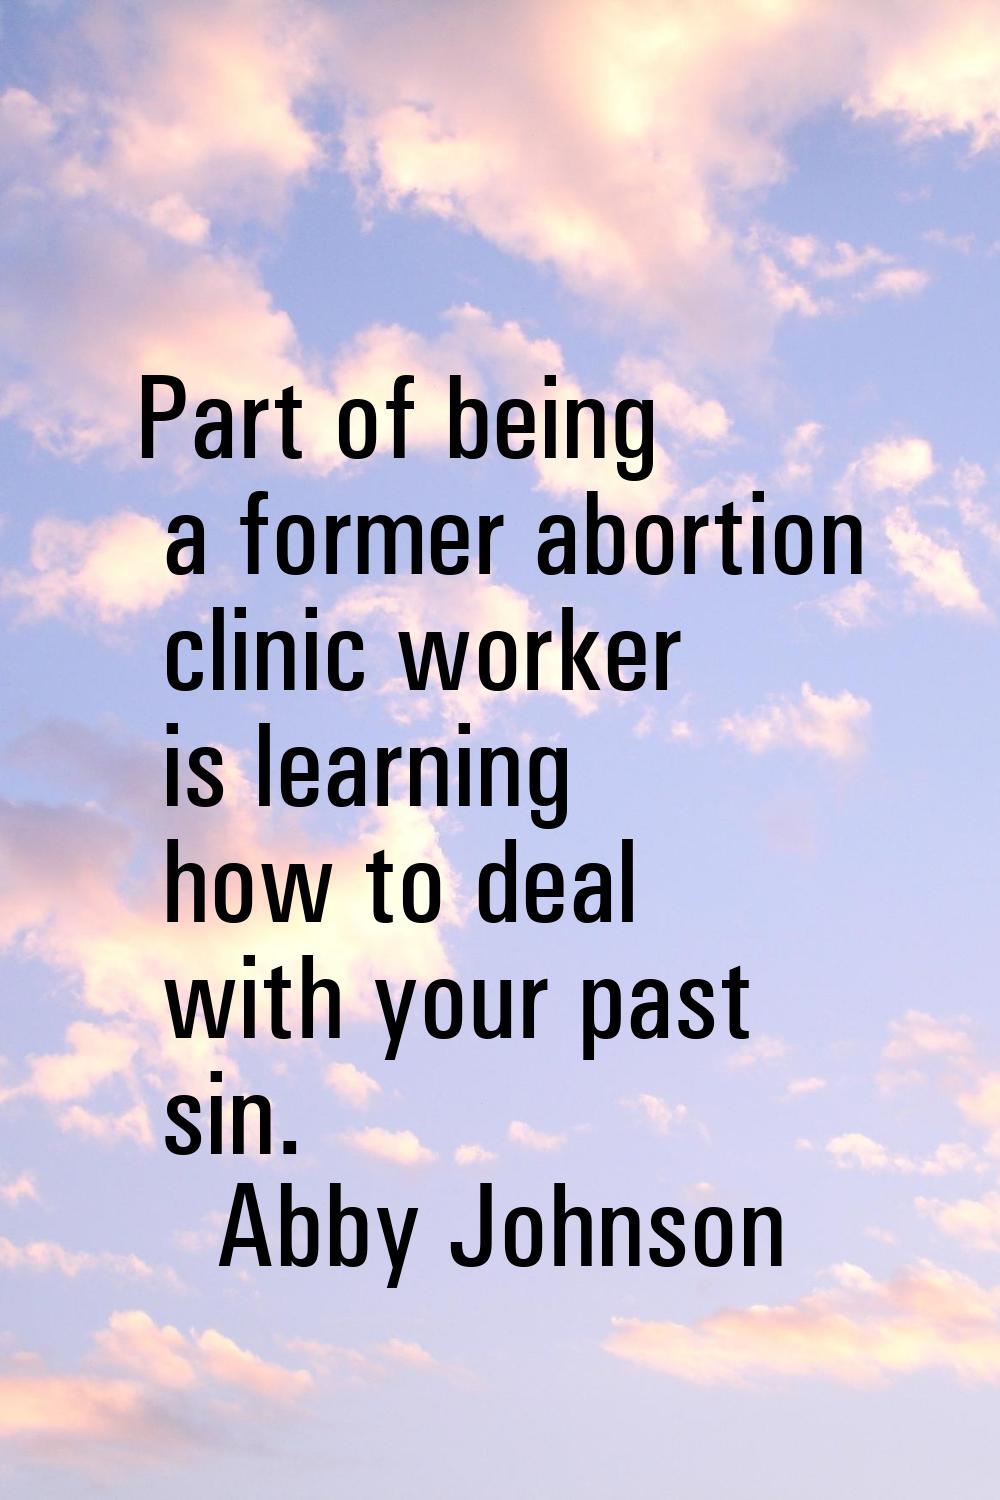 Part of being a former abortion clinic worker is learning how to deal with your past sin.